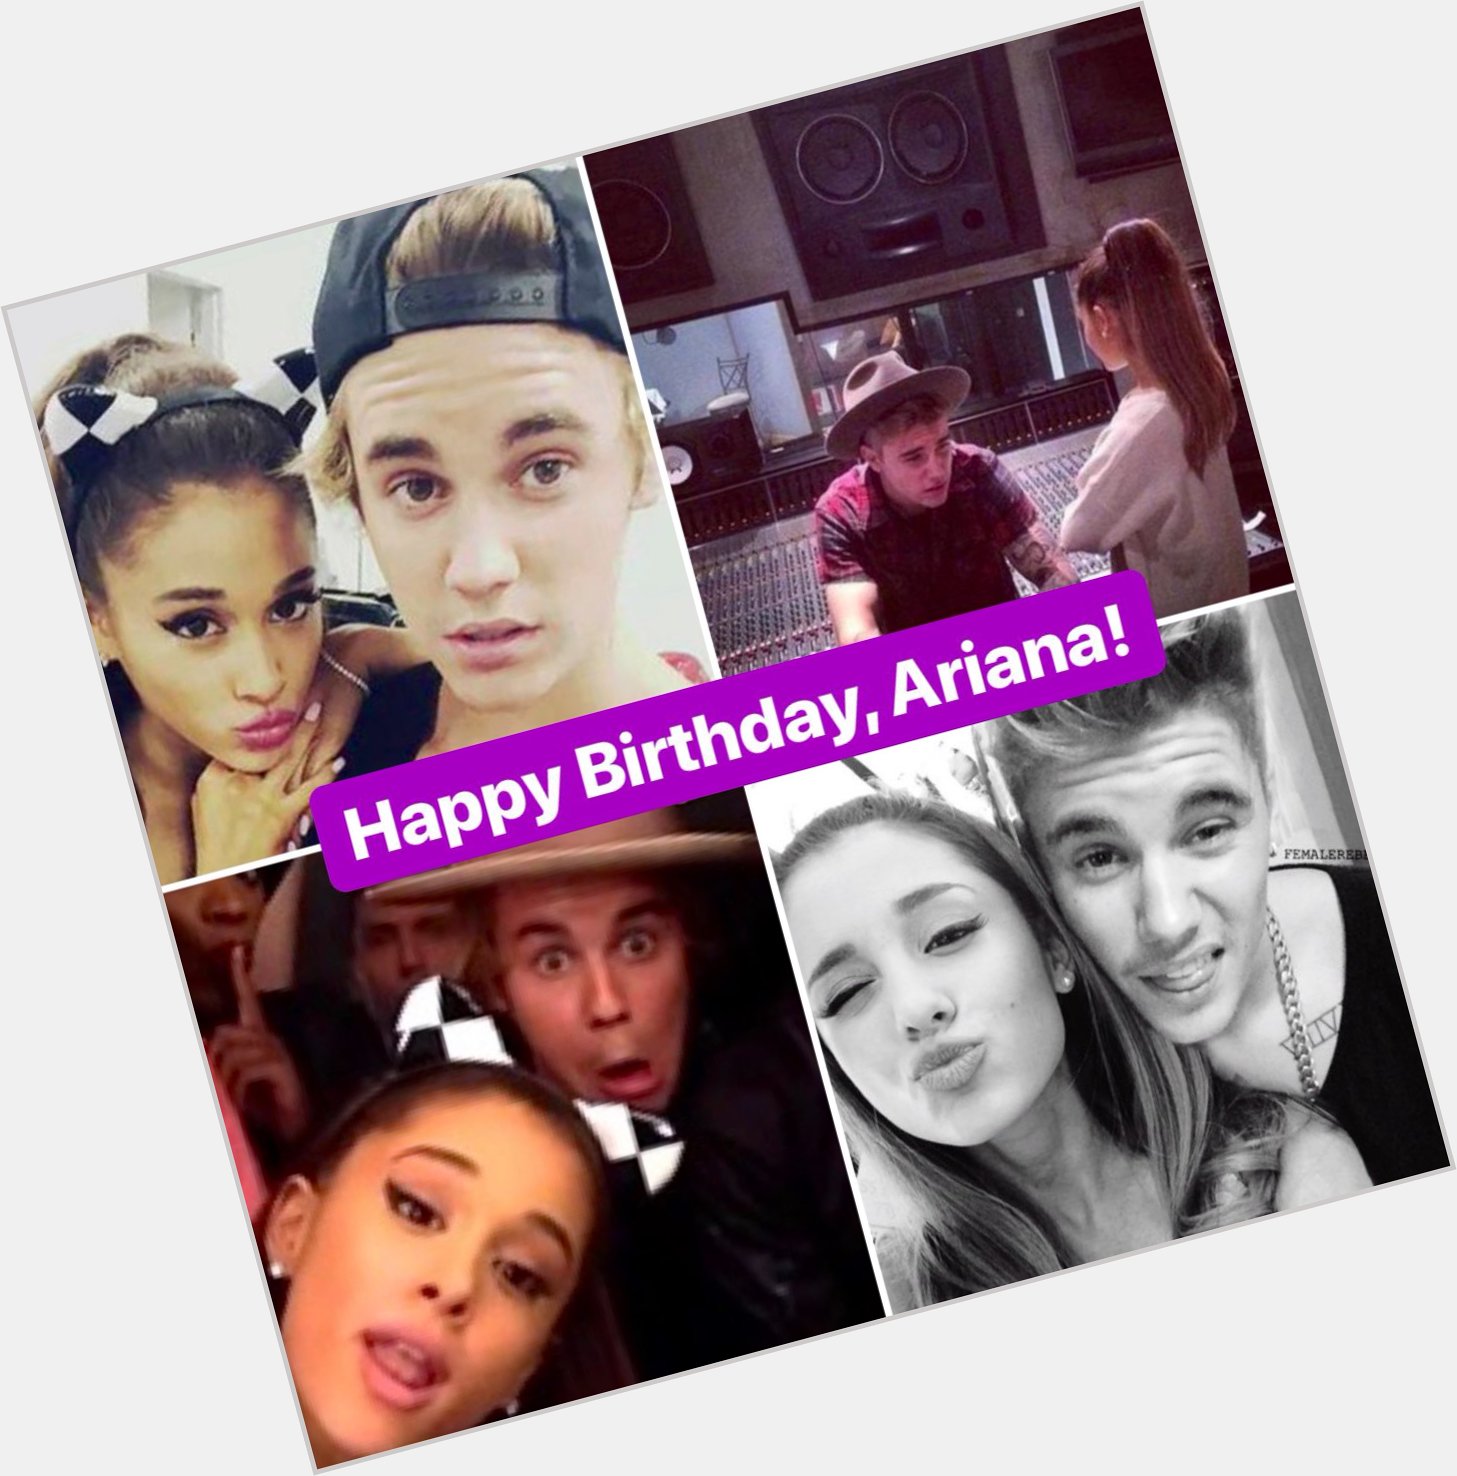 Please join us in wishing Ariana Grande a very Happy Birthday, today. We hope you have an awesome day! 